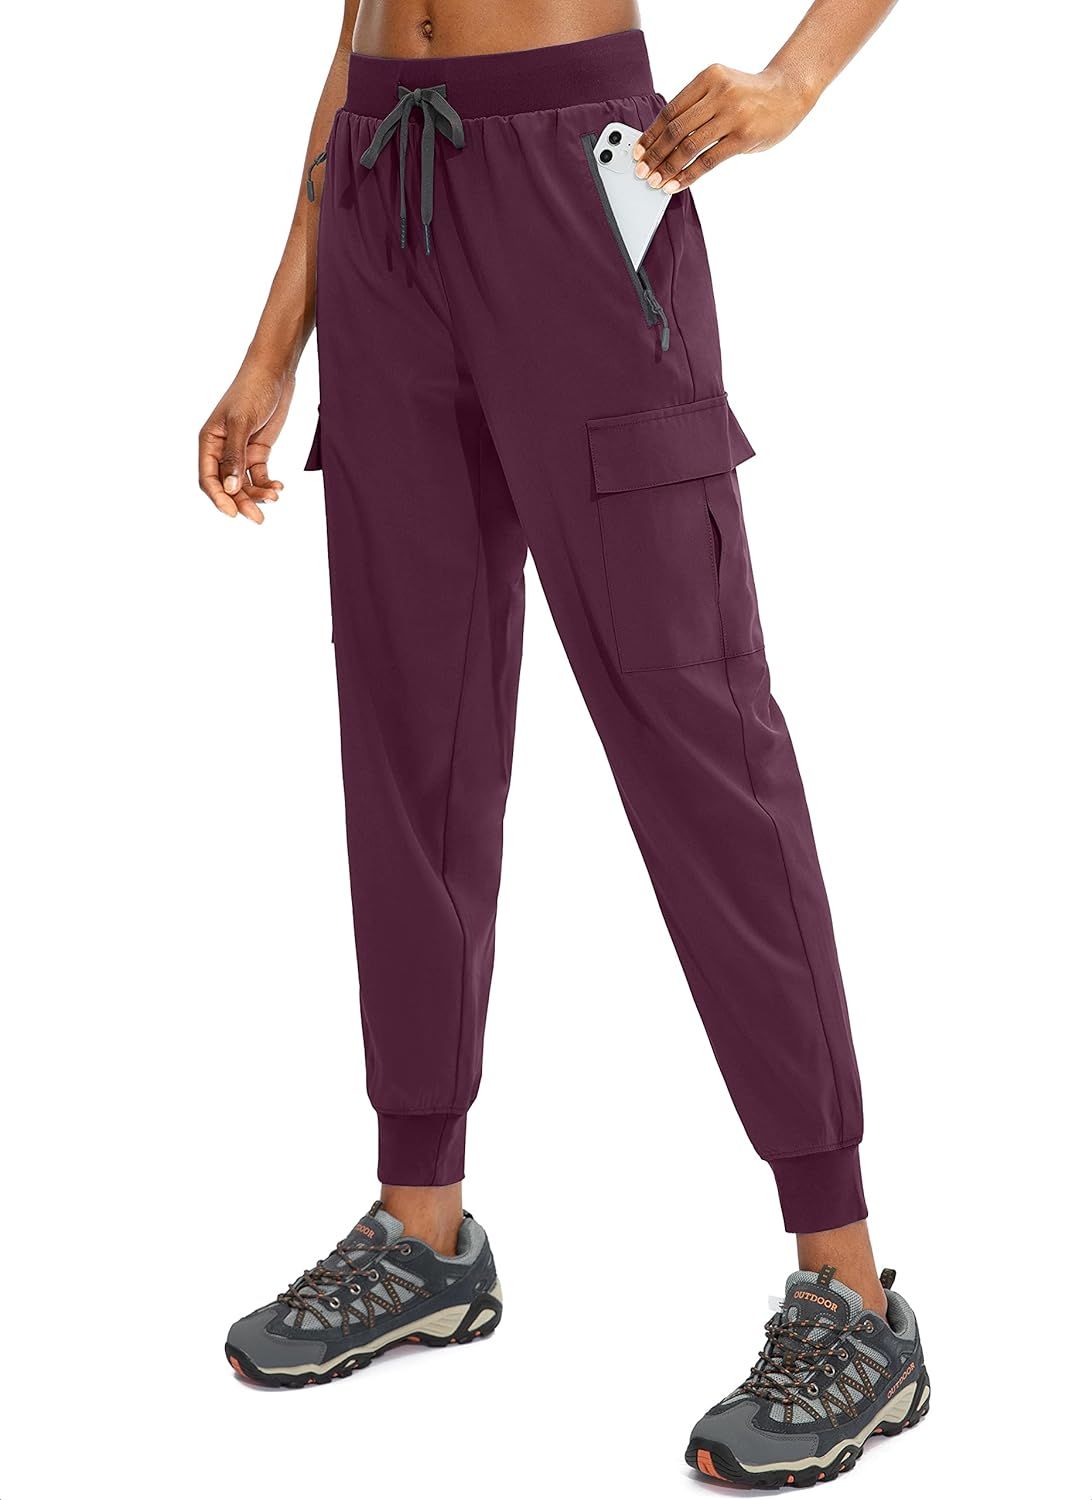 Soothfeel Women's Hiking Cargo Pants with Pockets Lightweight Quick Dry Travel Athletic Joggers P... | Amazon (US)